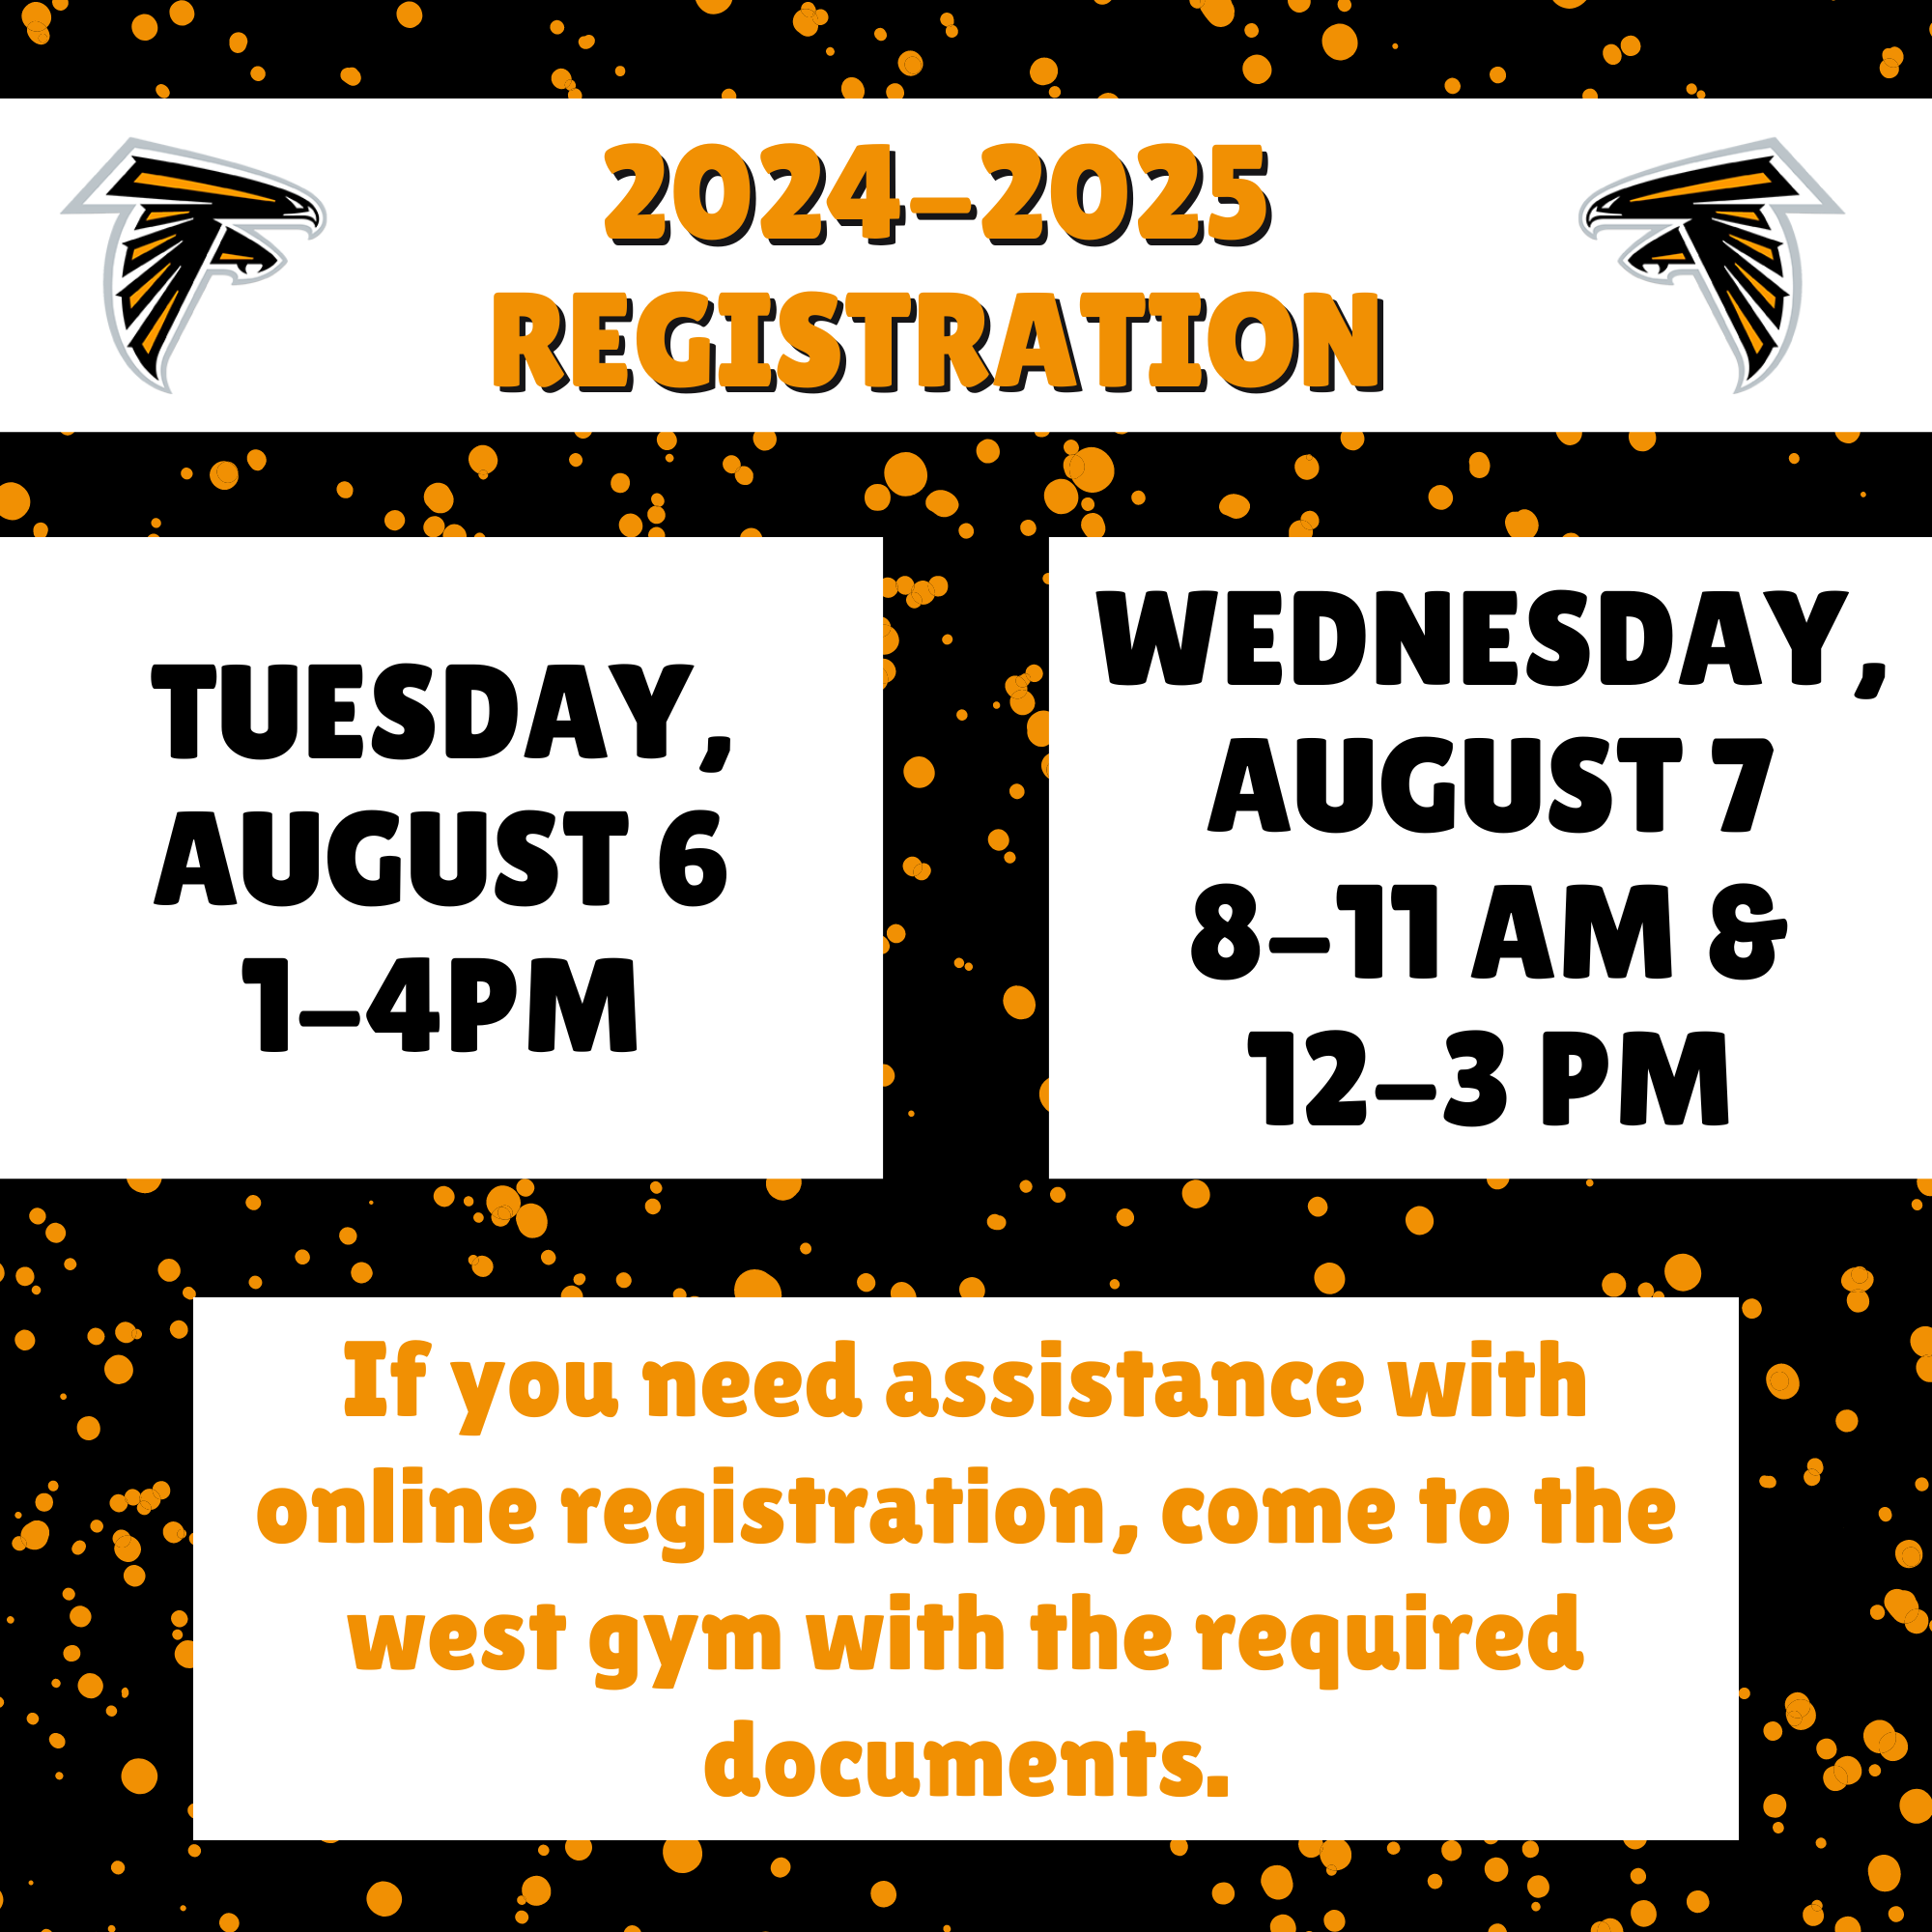 online registration help dates (August 7th 1-4 & August 8th 8-3)